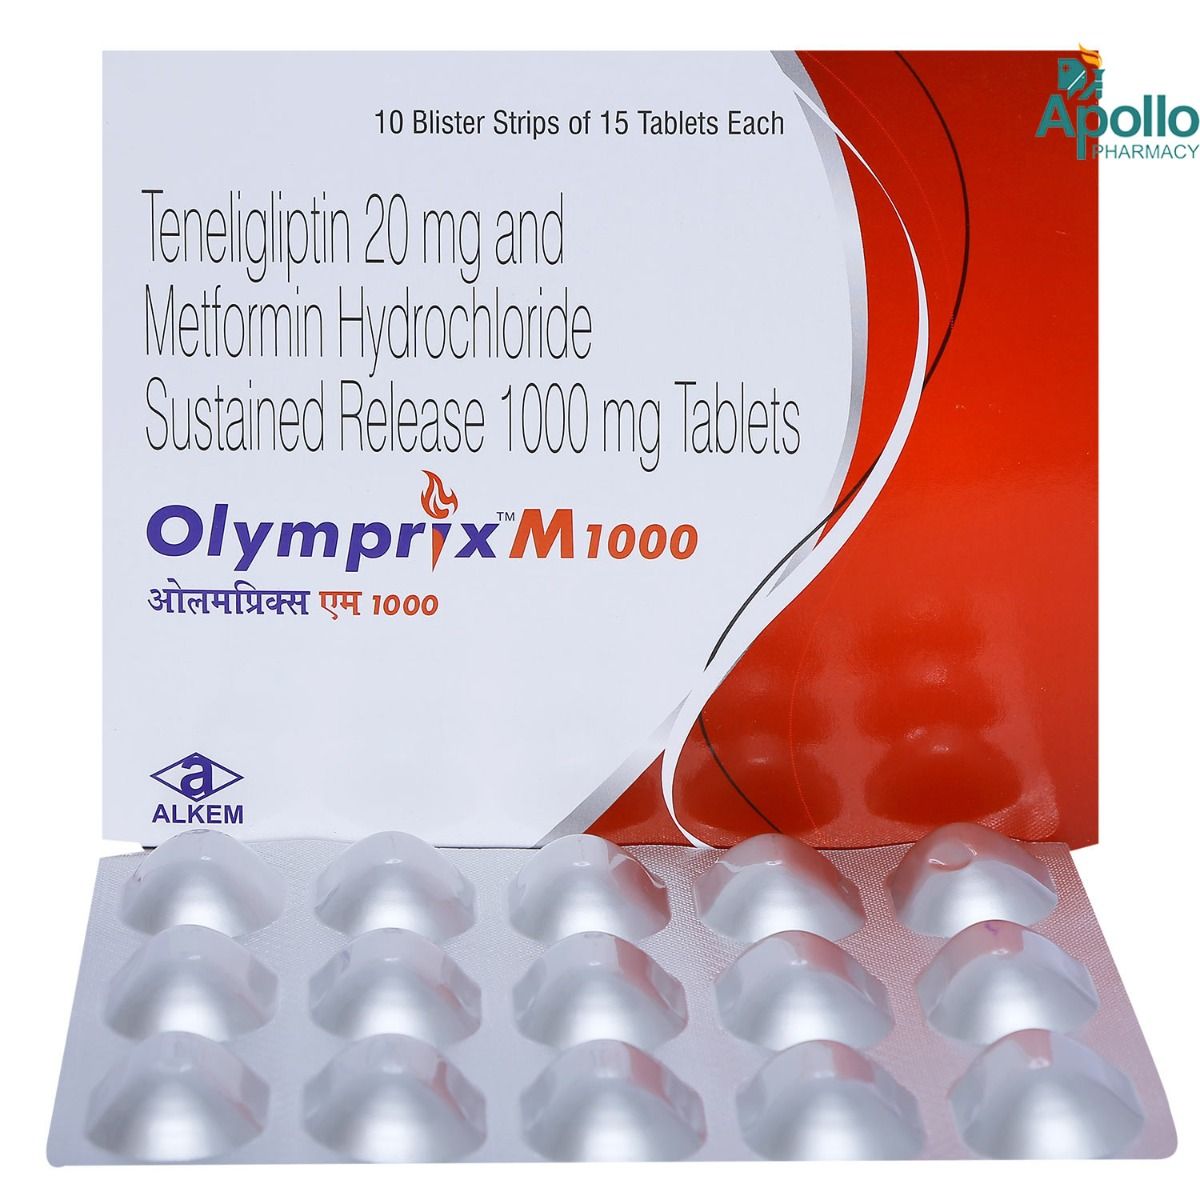 Olymprix M 1000 Tablet 15's Price, Uses, Side Effects, Composition